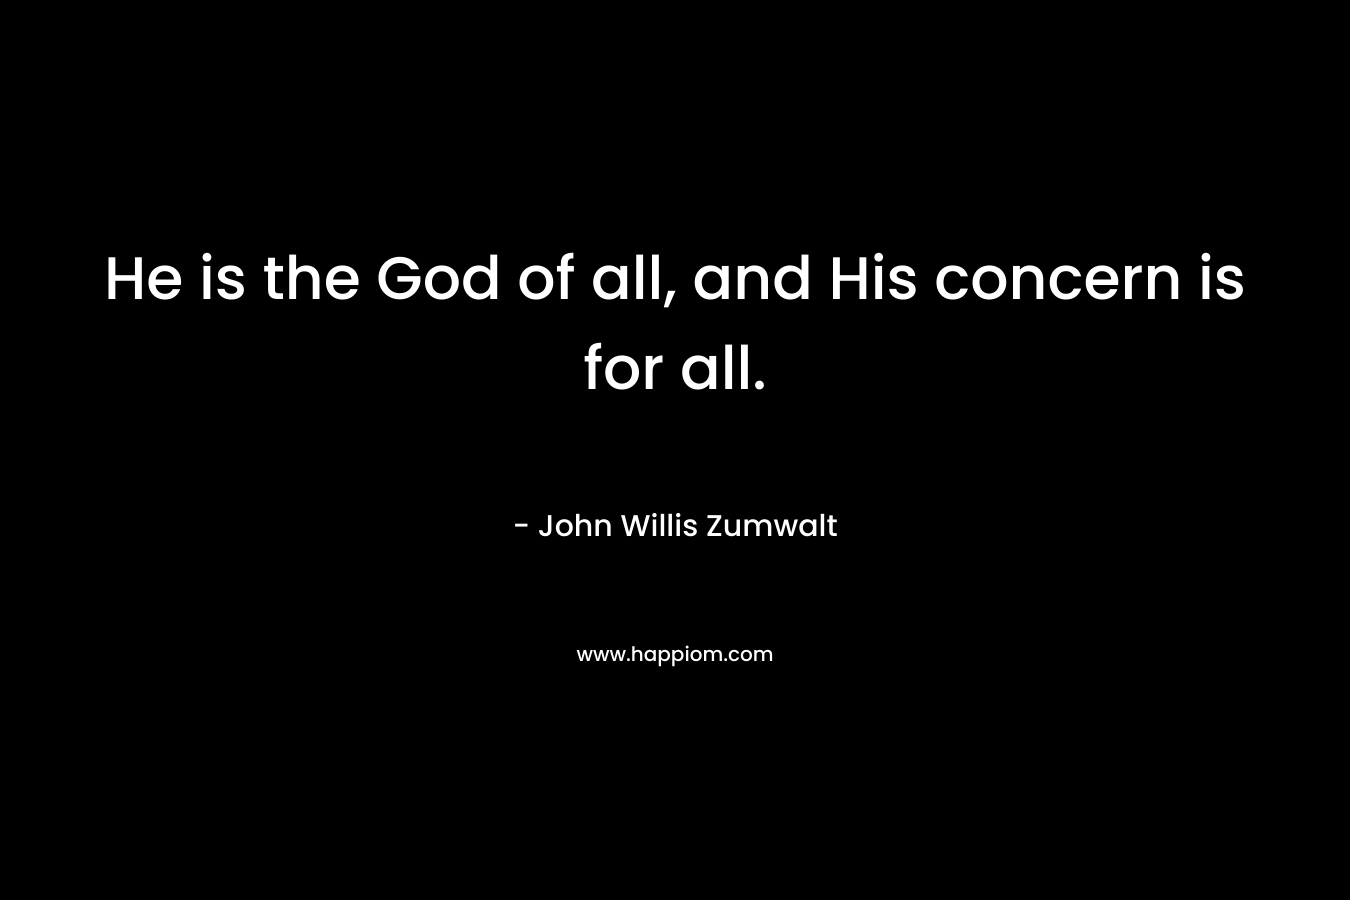 He is the God of all, and His concern is for all. – John Willis Zumwalt